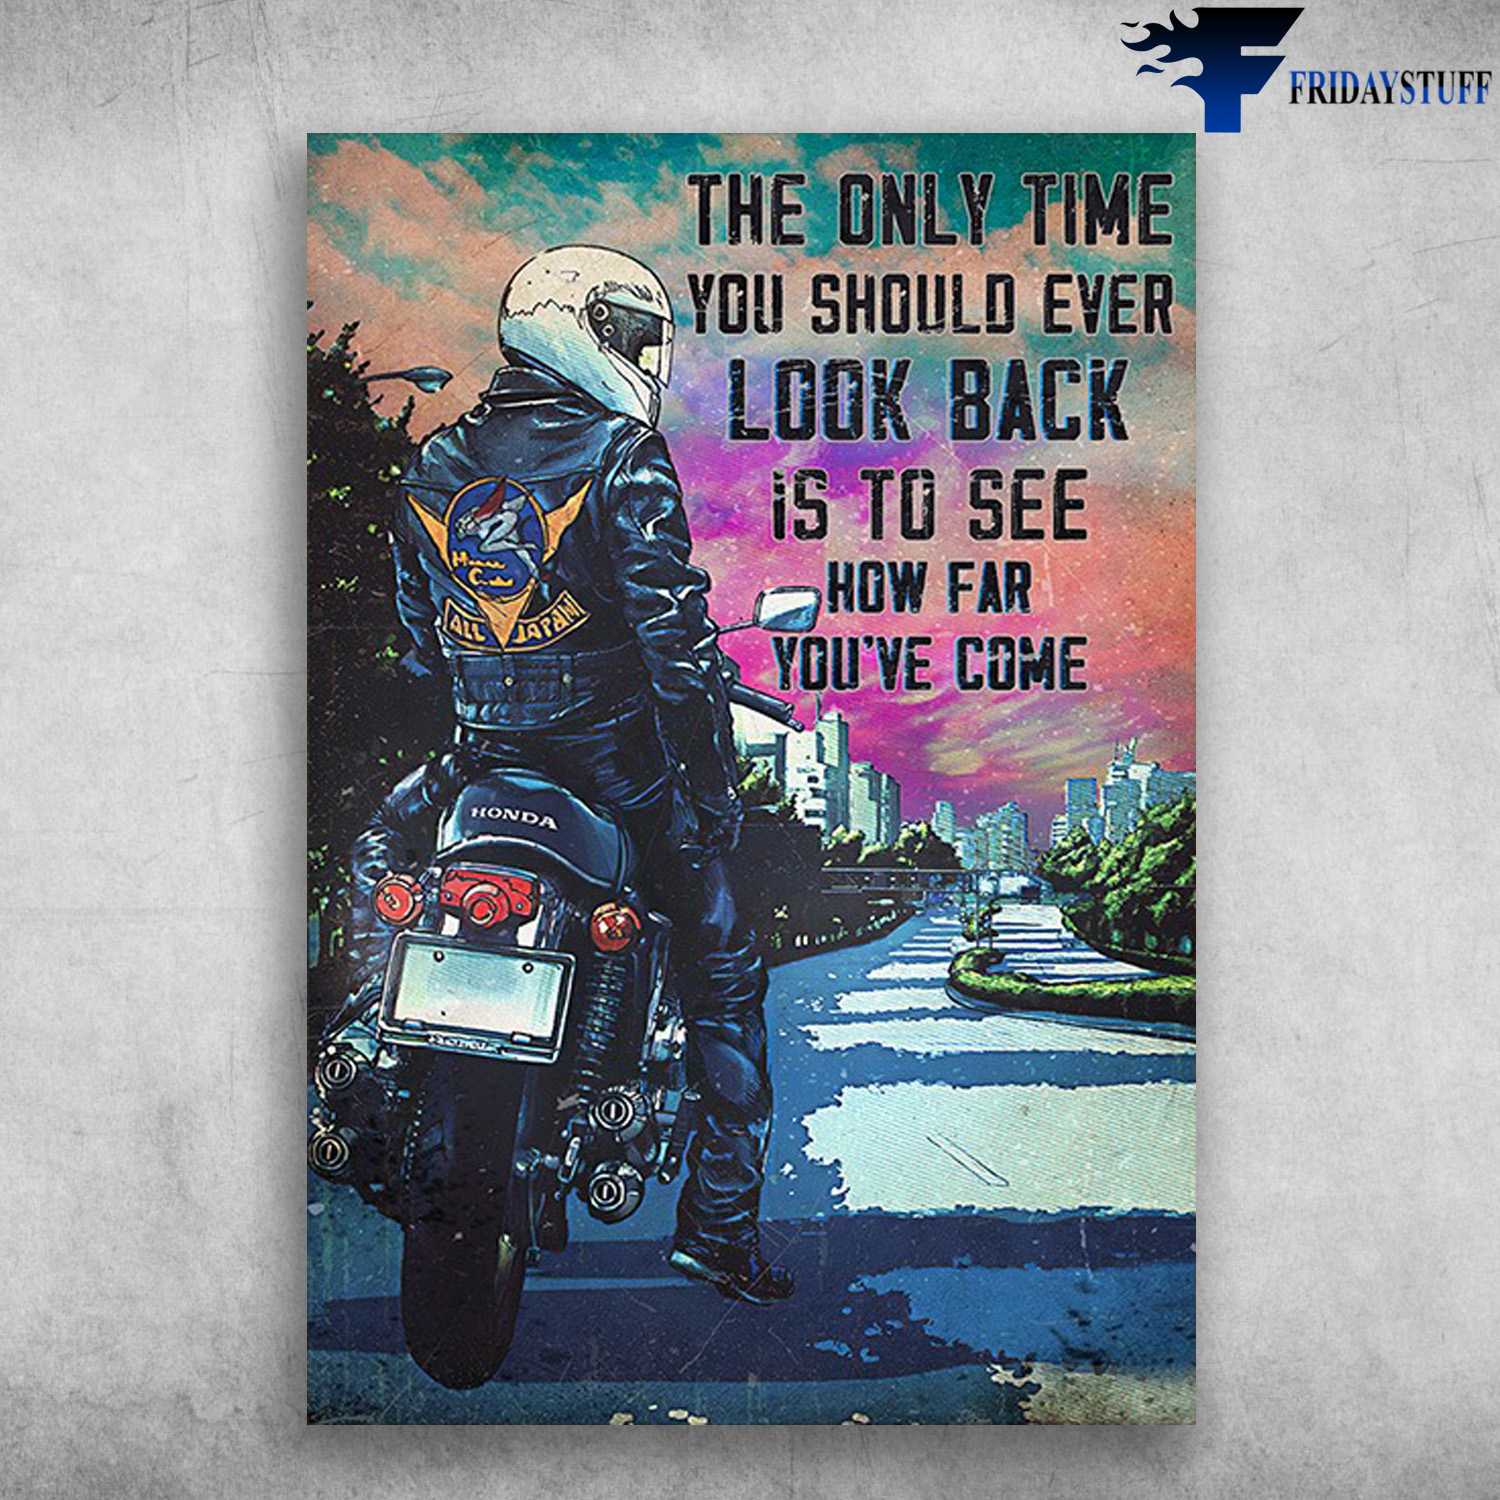 Motorcycle Man, Biker Lover - The Only Time You Should Ever Look Back, Is To See How Far You've Come